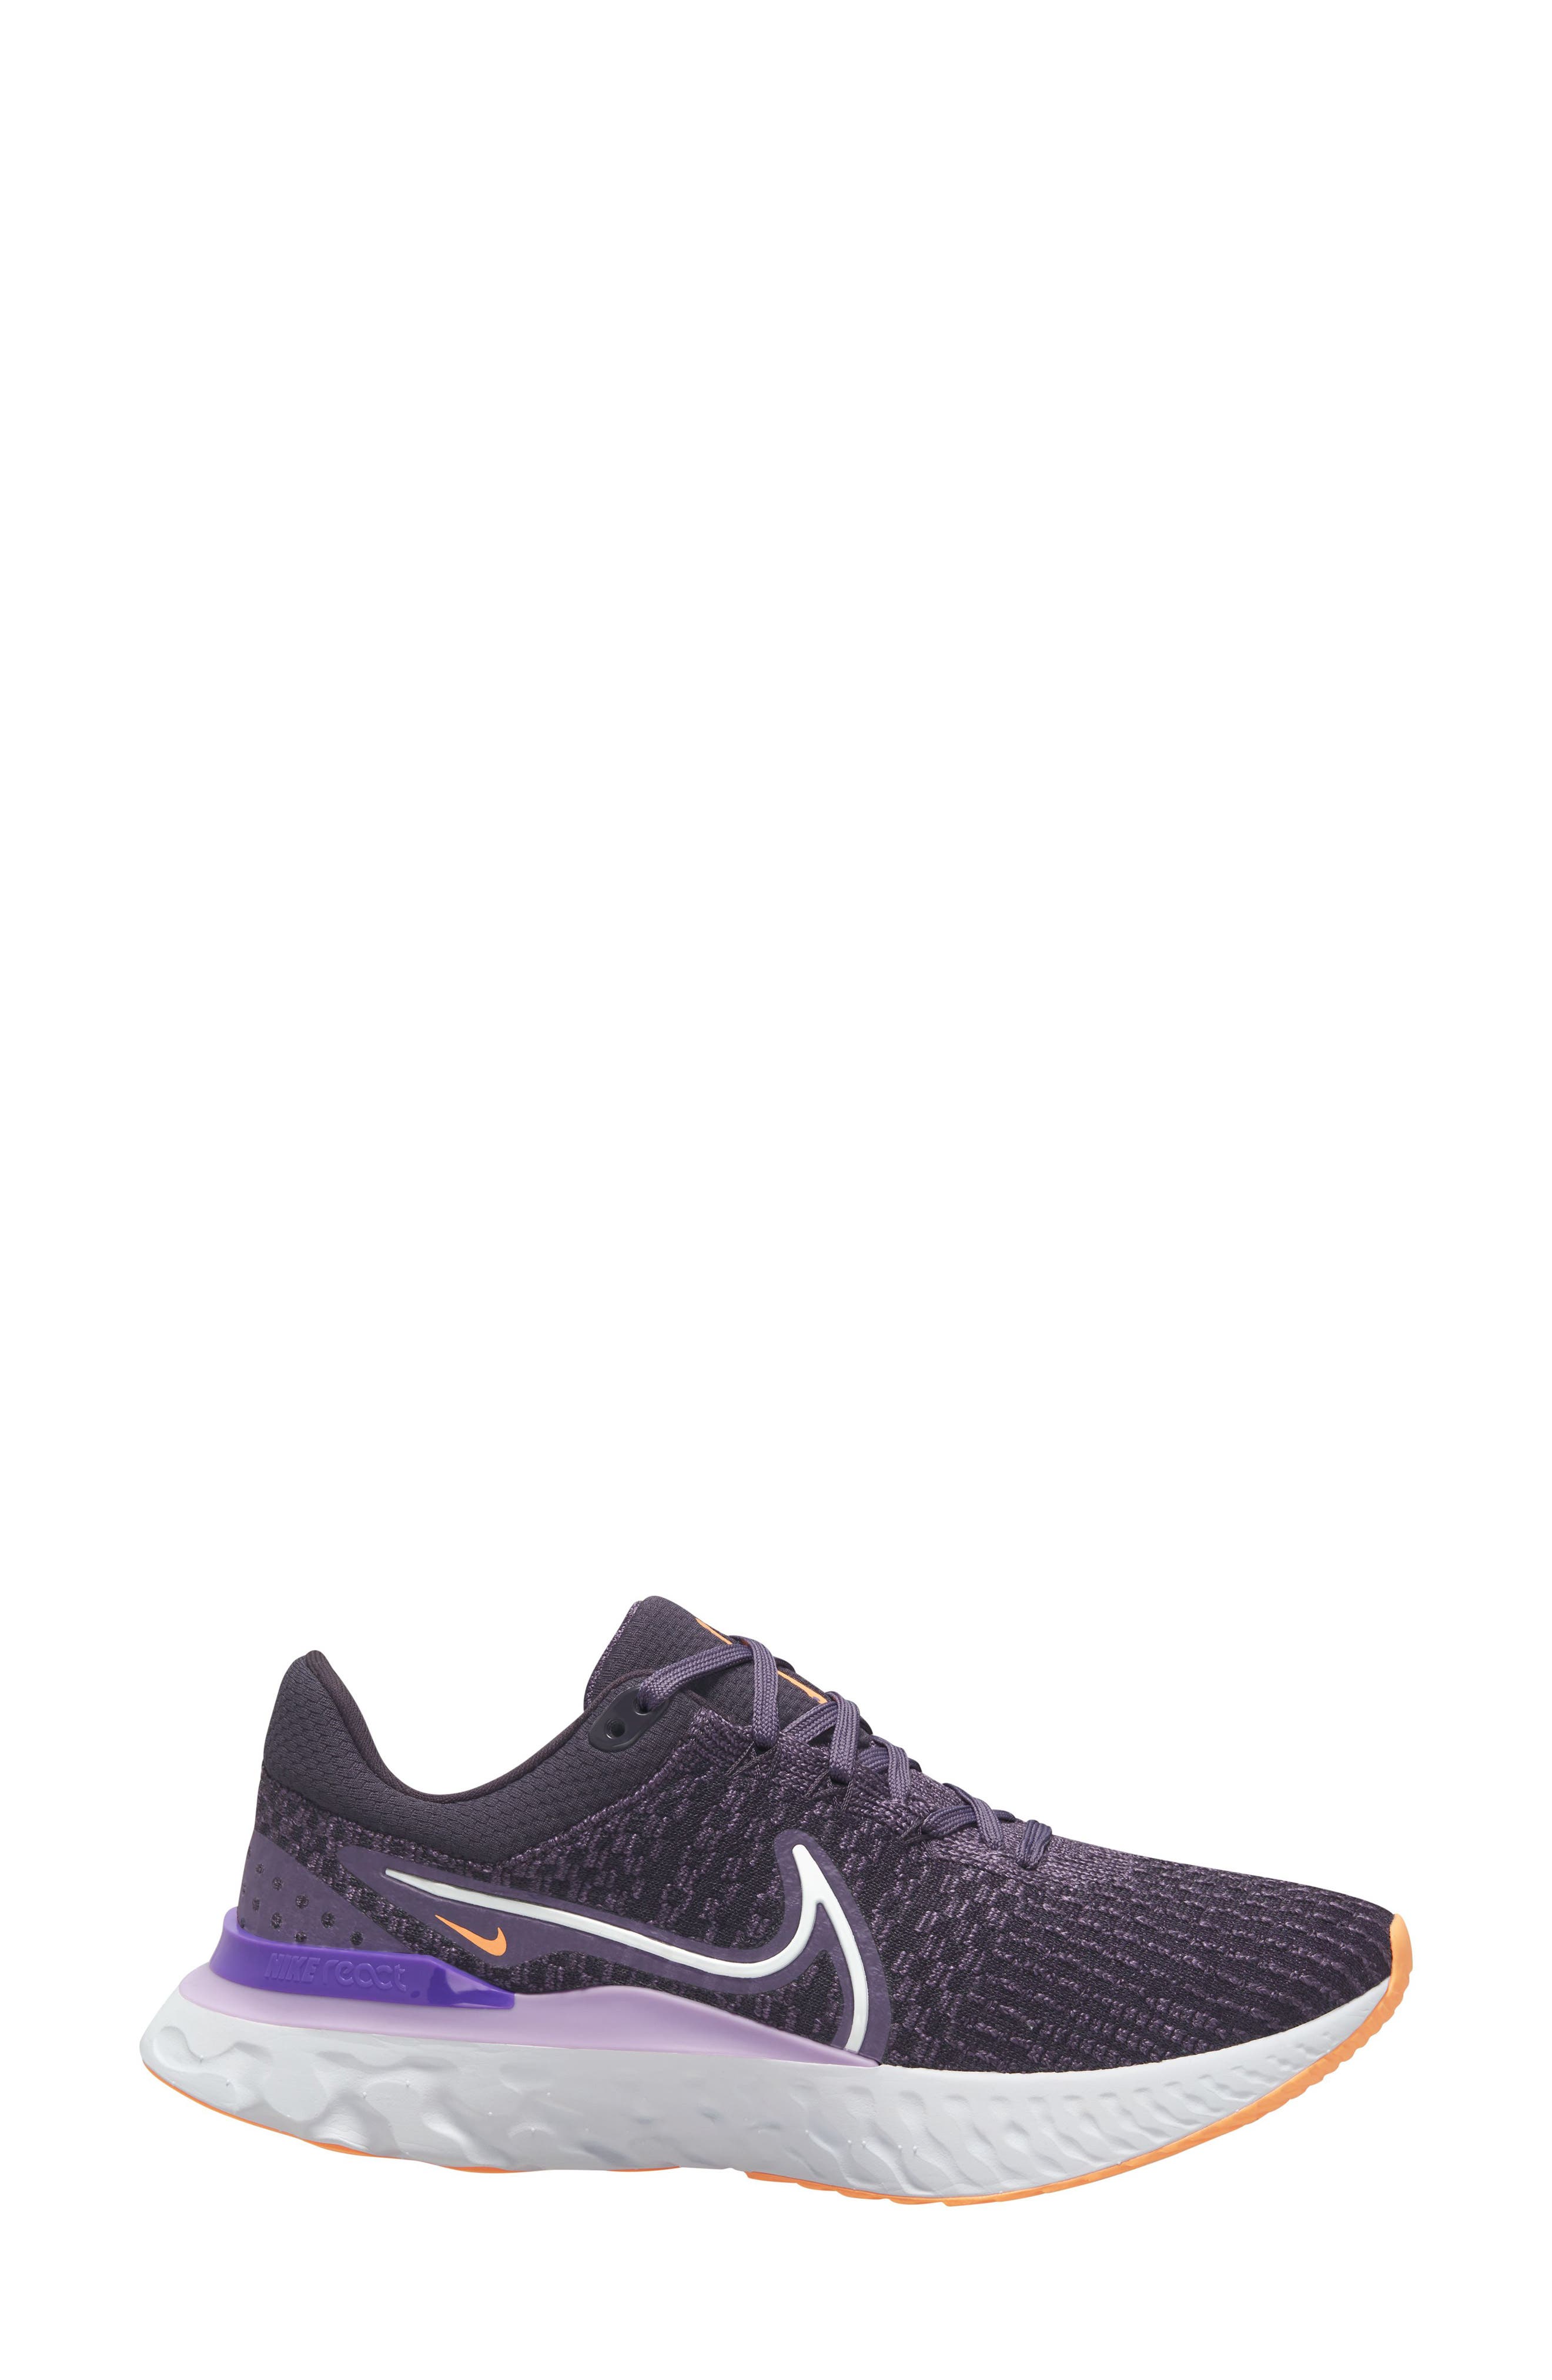 nike running shoes black and purple